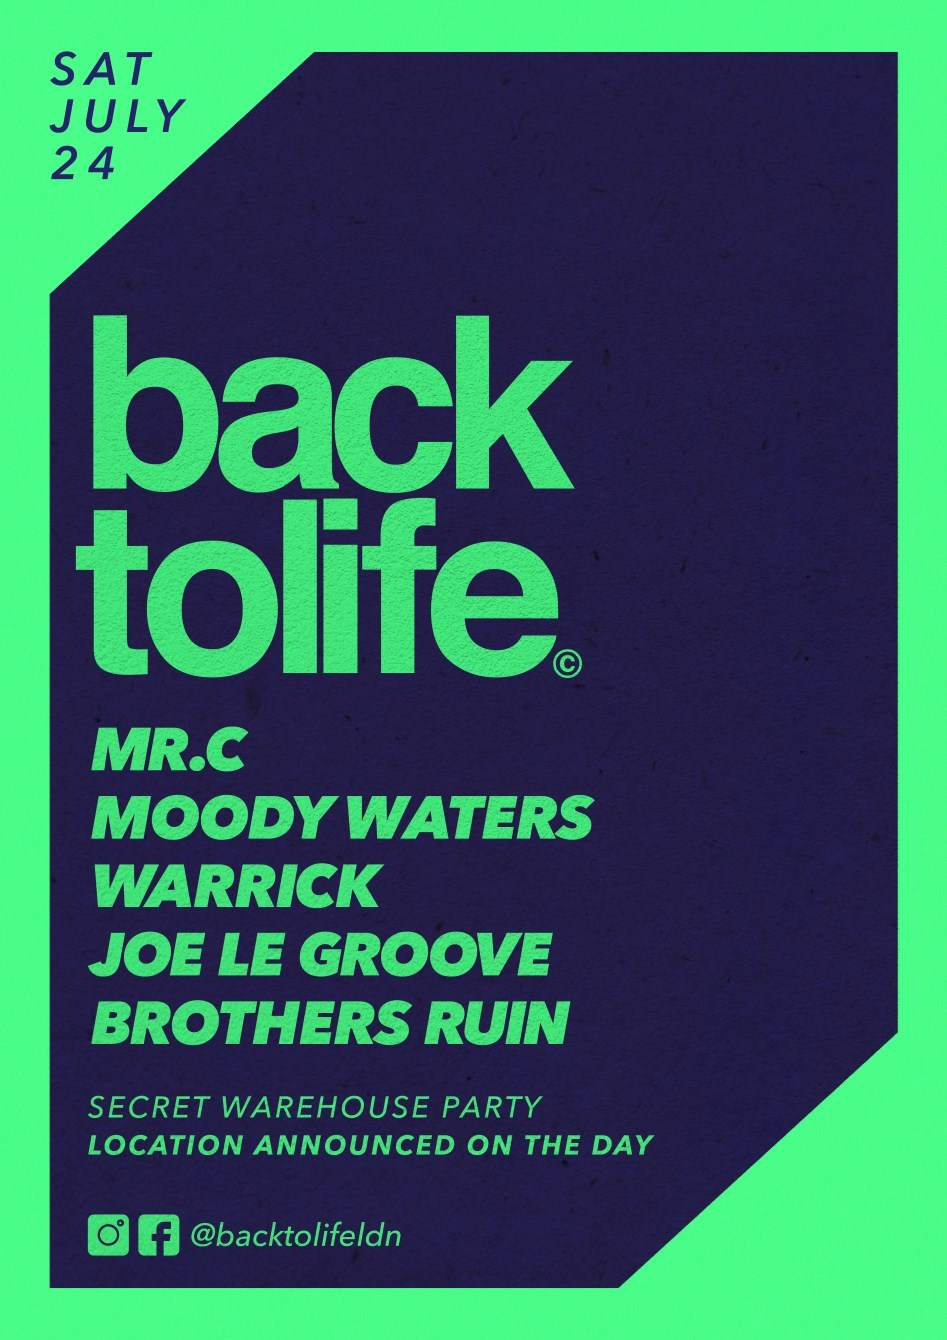 Back to Life LDN - Secret Warehouse Party in London - フライヤー表